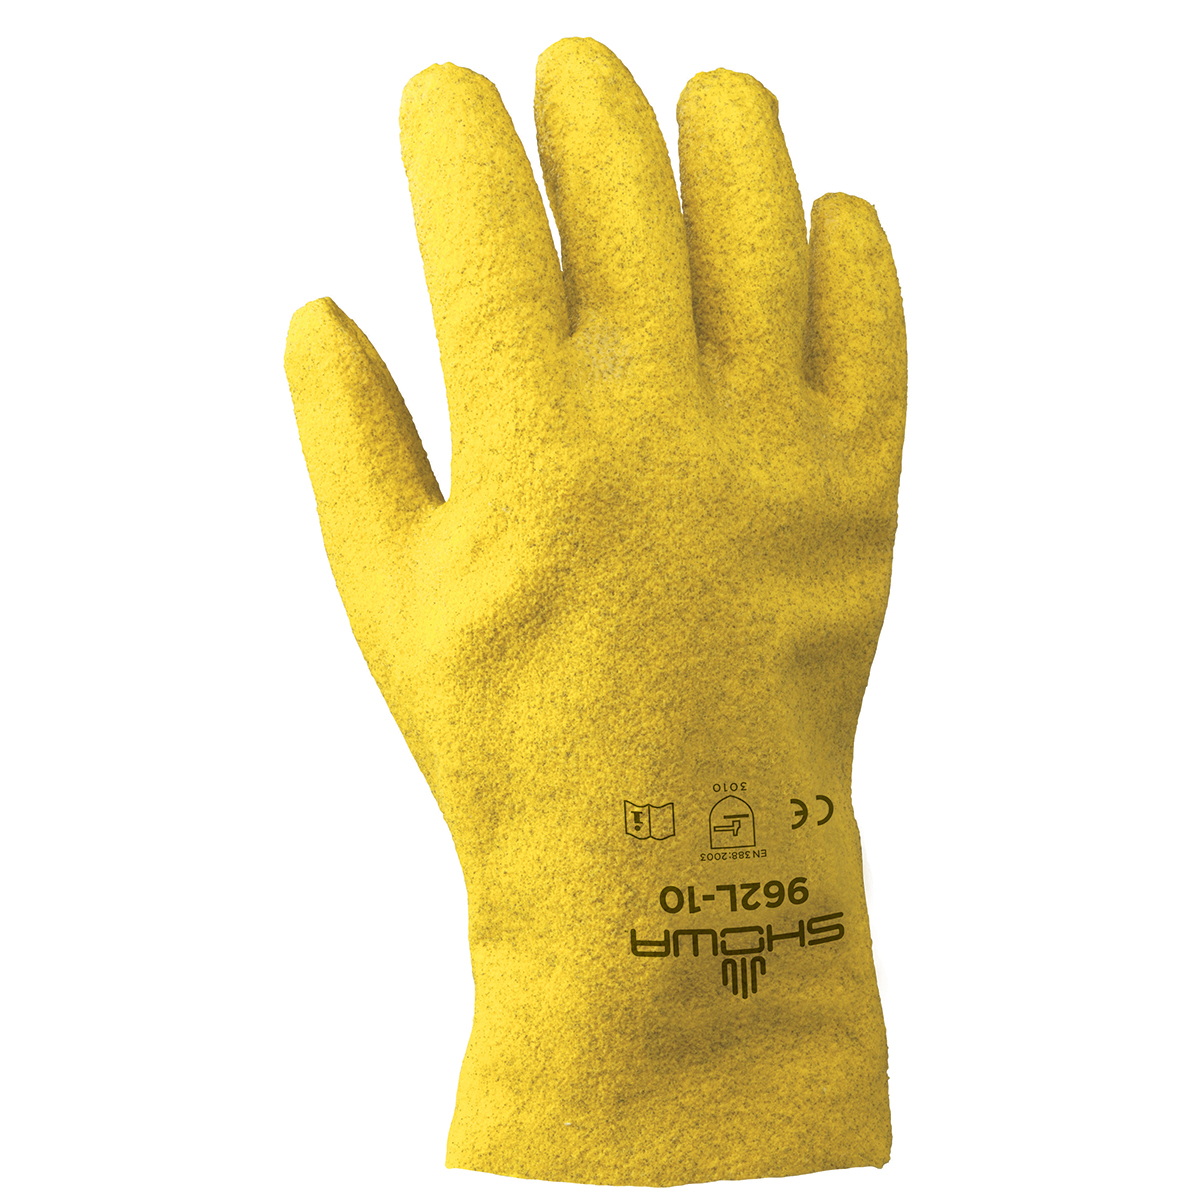 SHOWA® Size 11 SHOWA® Heavy Duty PVC Full Hand Coated Work Gloves With Cotton Liner And Slip-On Cuff